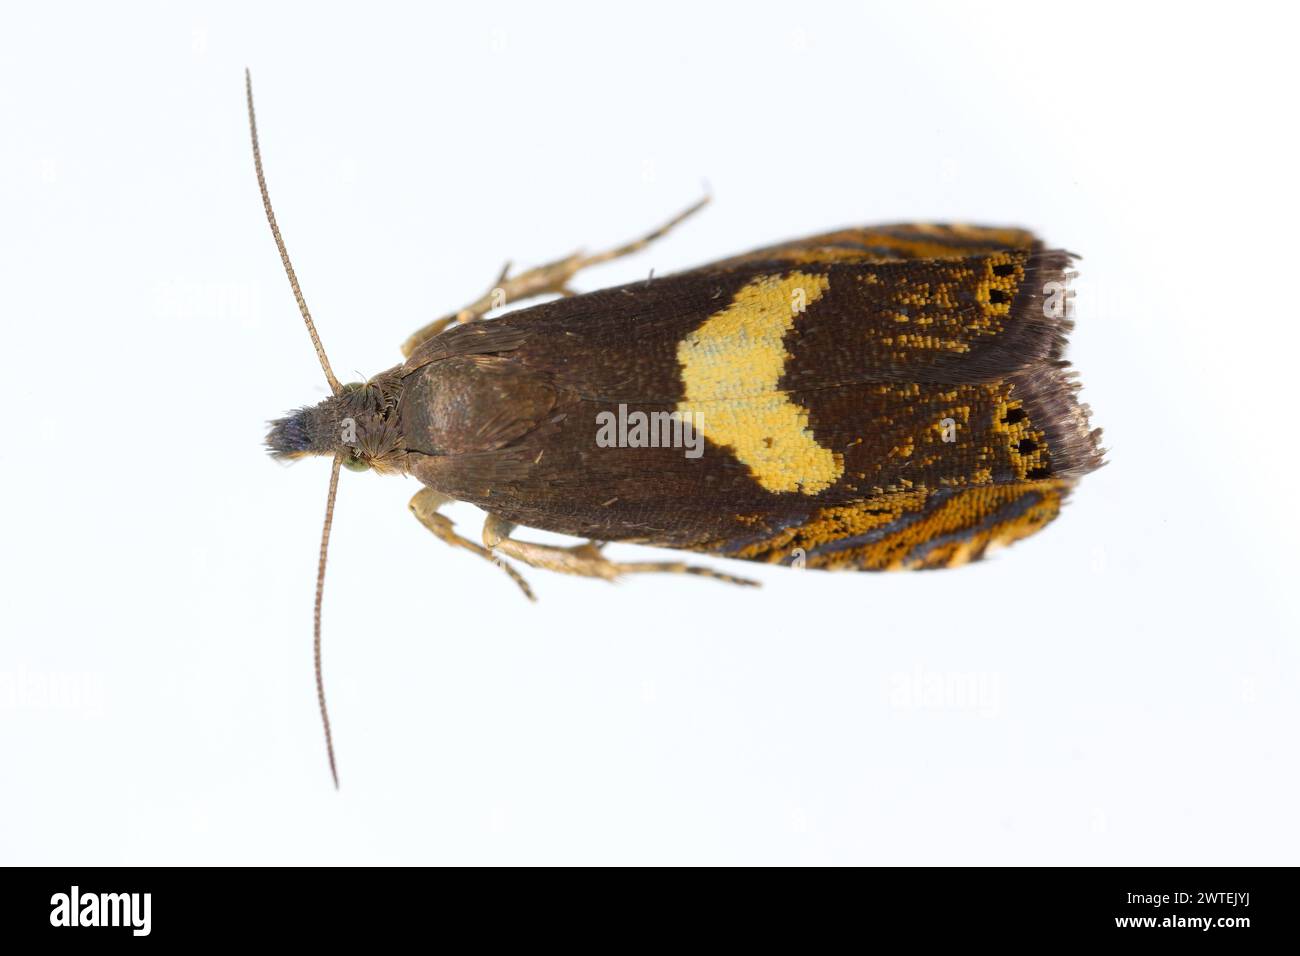 Common drill (Dichrorampha petiverella). Beautiful moth of the family Tortricidae, leafroller moths. Stock Photo